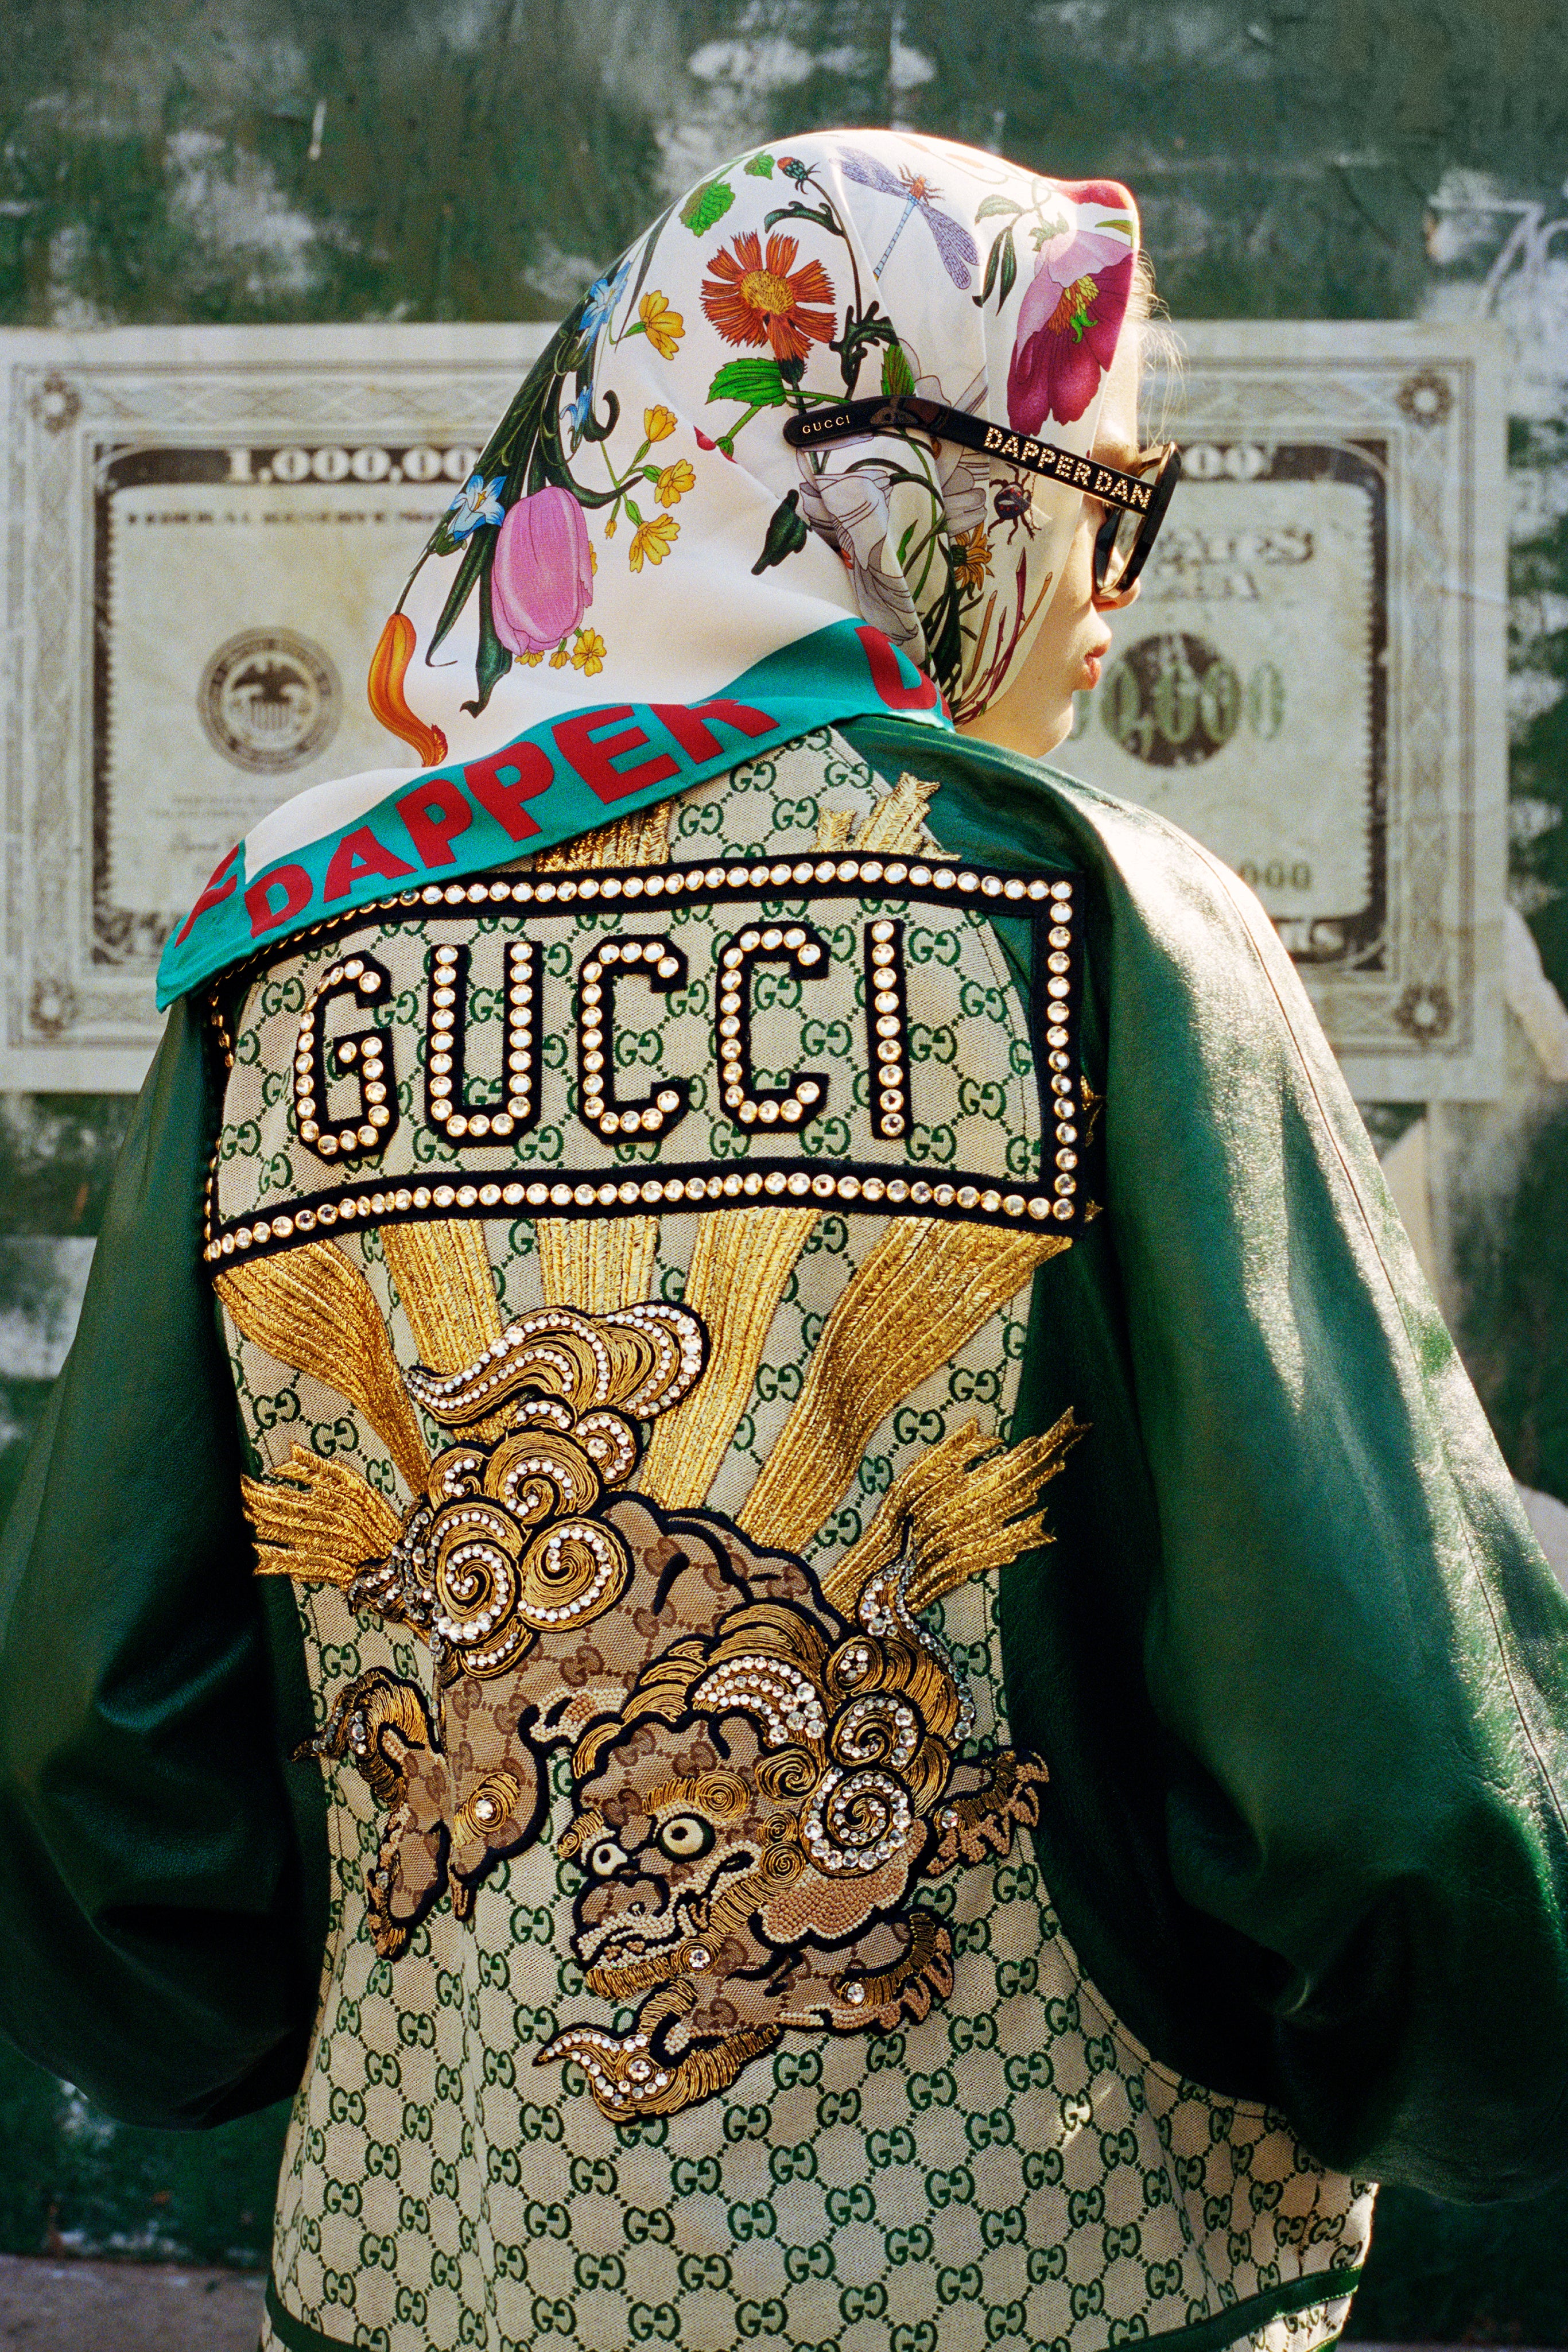 With Its Limited Edition Book ‘Dapper Dan’s Harlem,’ Gucci Pays Homage To The Fashion Legend